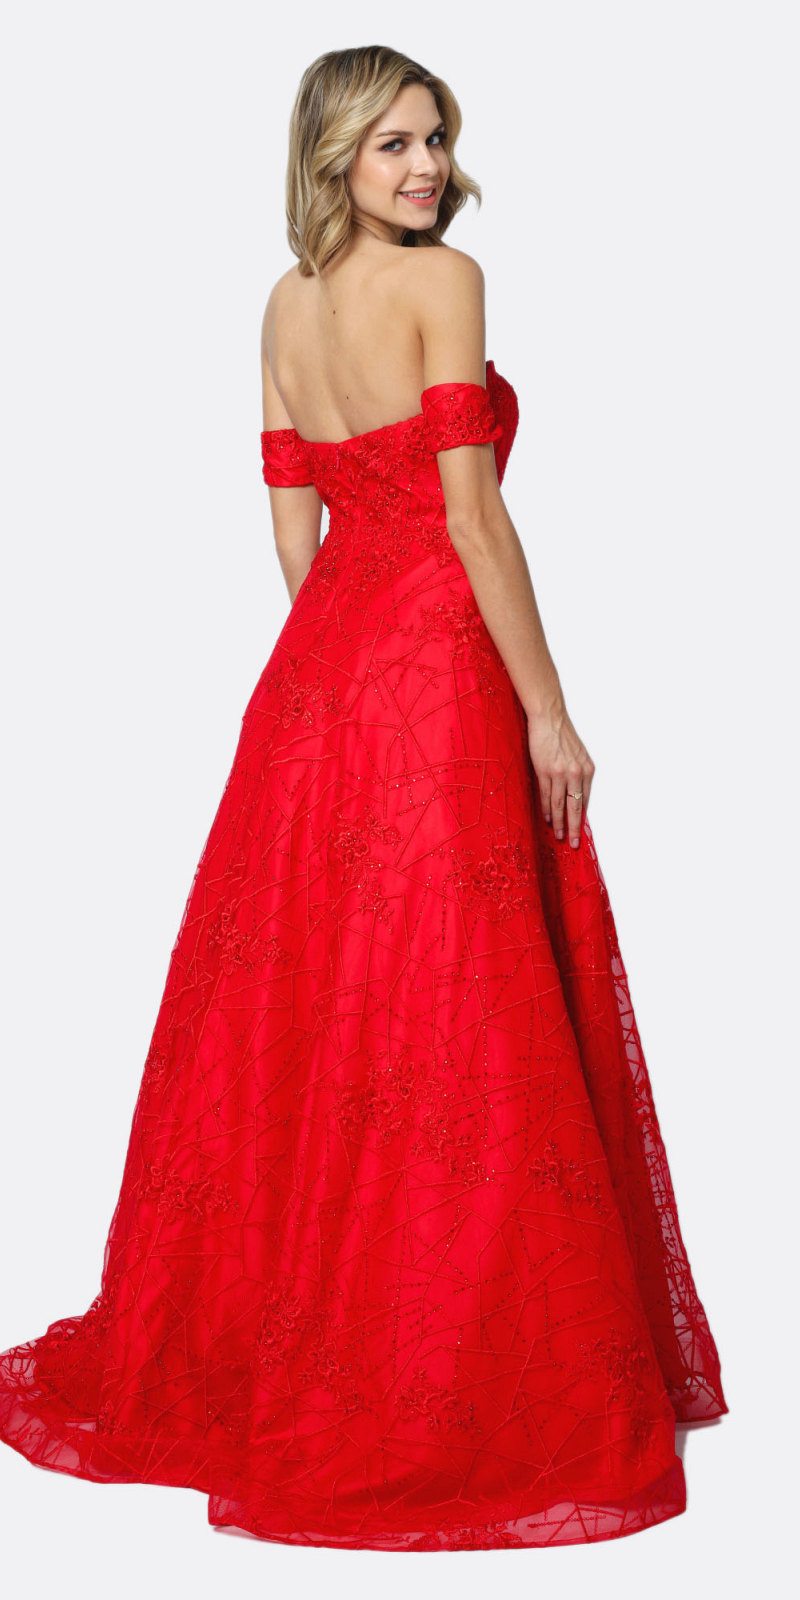 Juliet 692 Long Embroidered Lace Ball Gown Dress Red With Arm Band